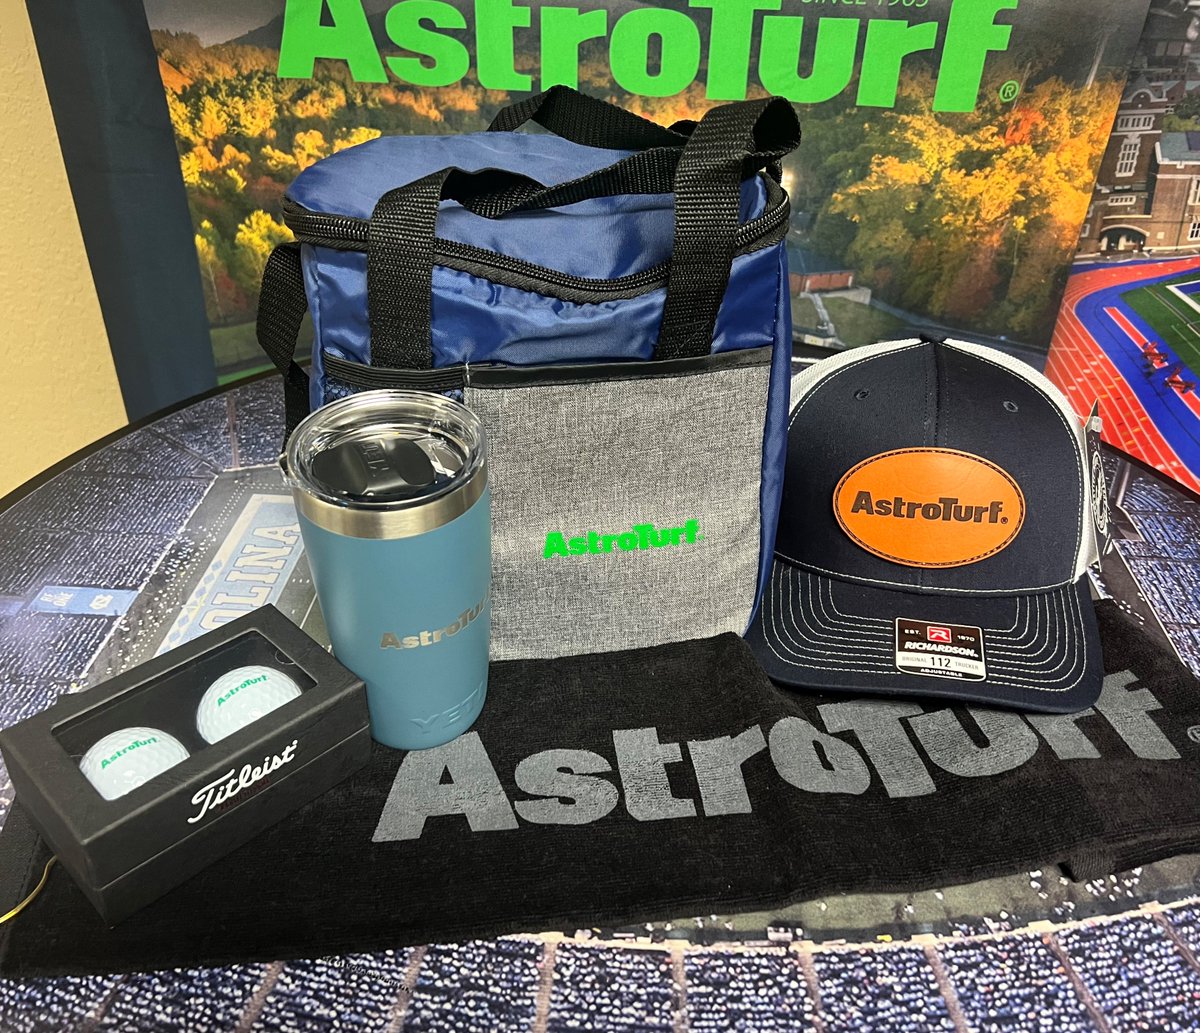 The winner of our AstroTurf golf package #giveaway is @krazykayjun - Congratulations! #12DaysofGiveaways #giveawayalert